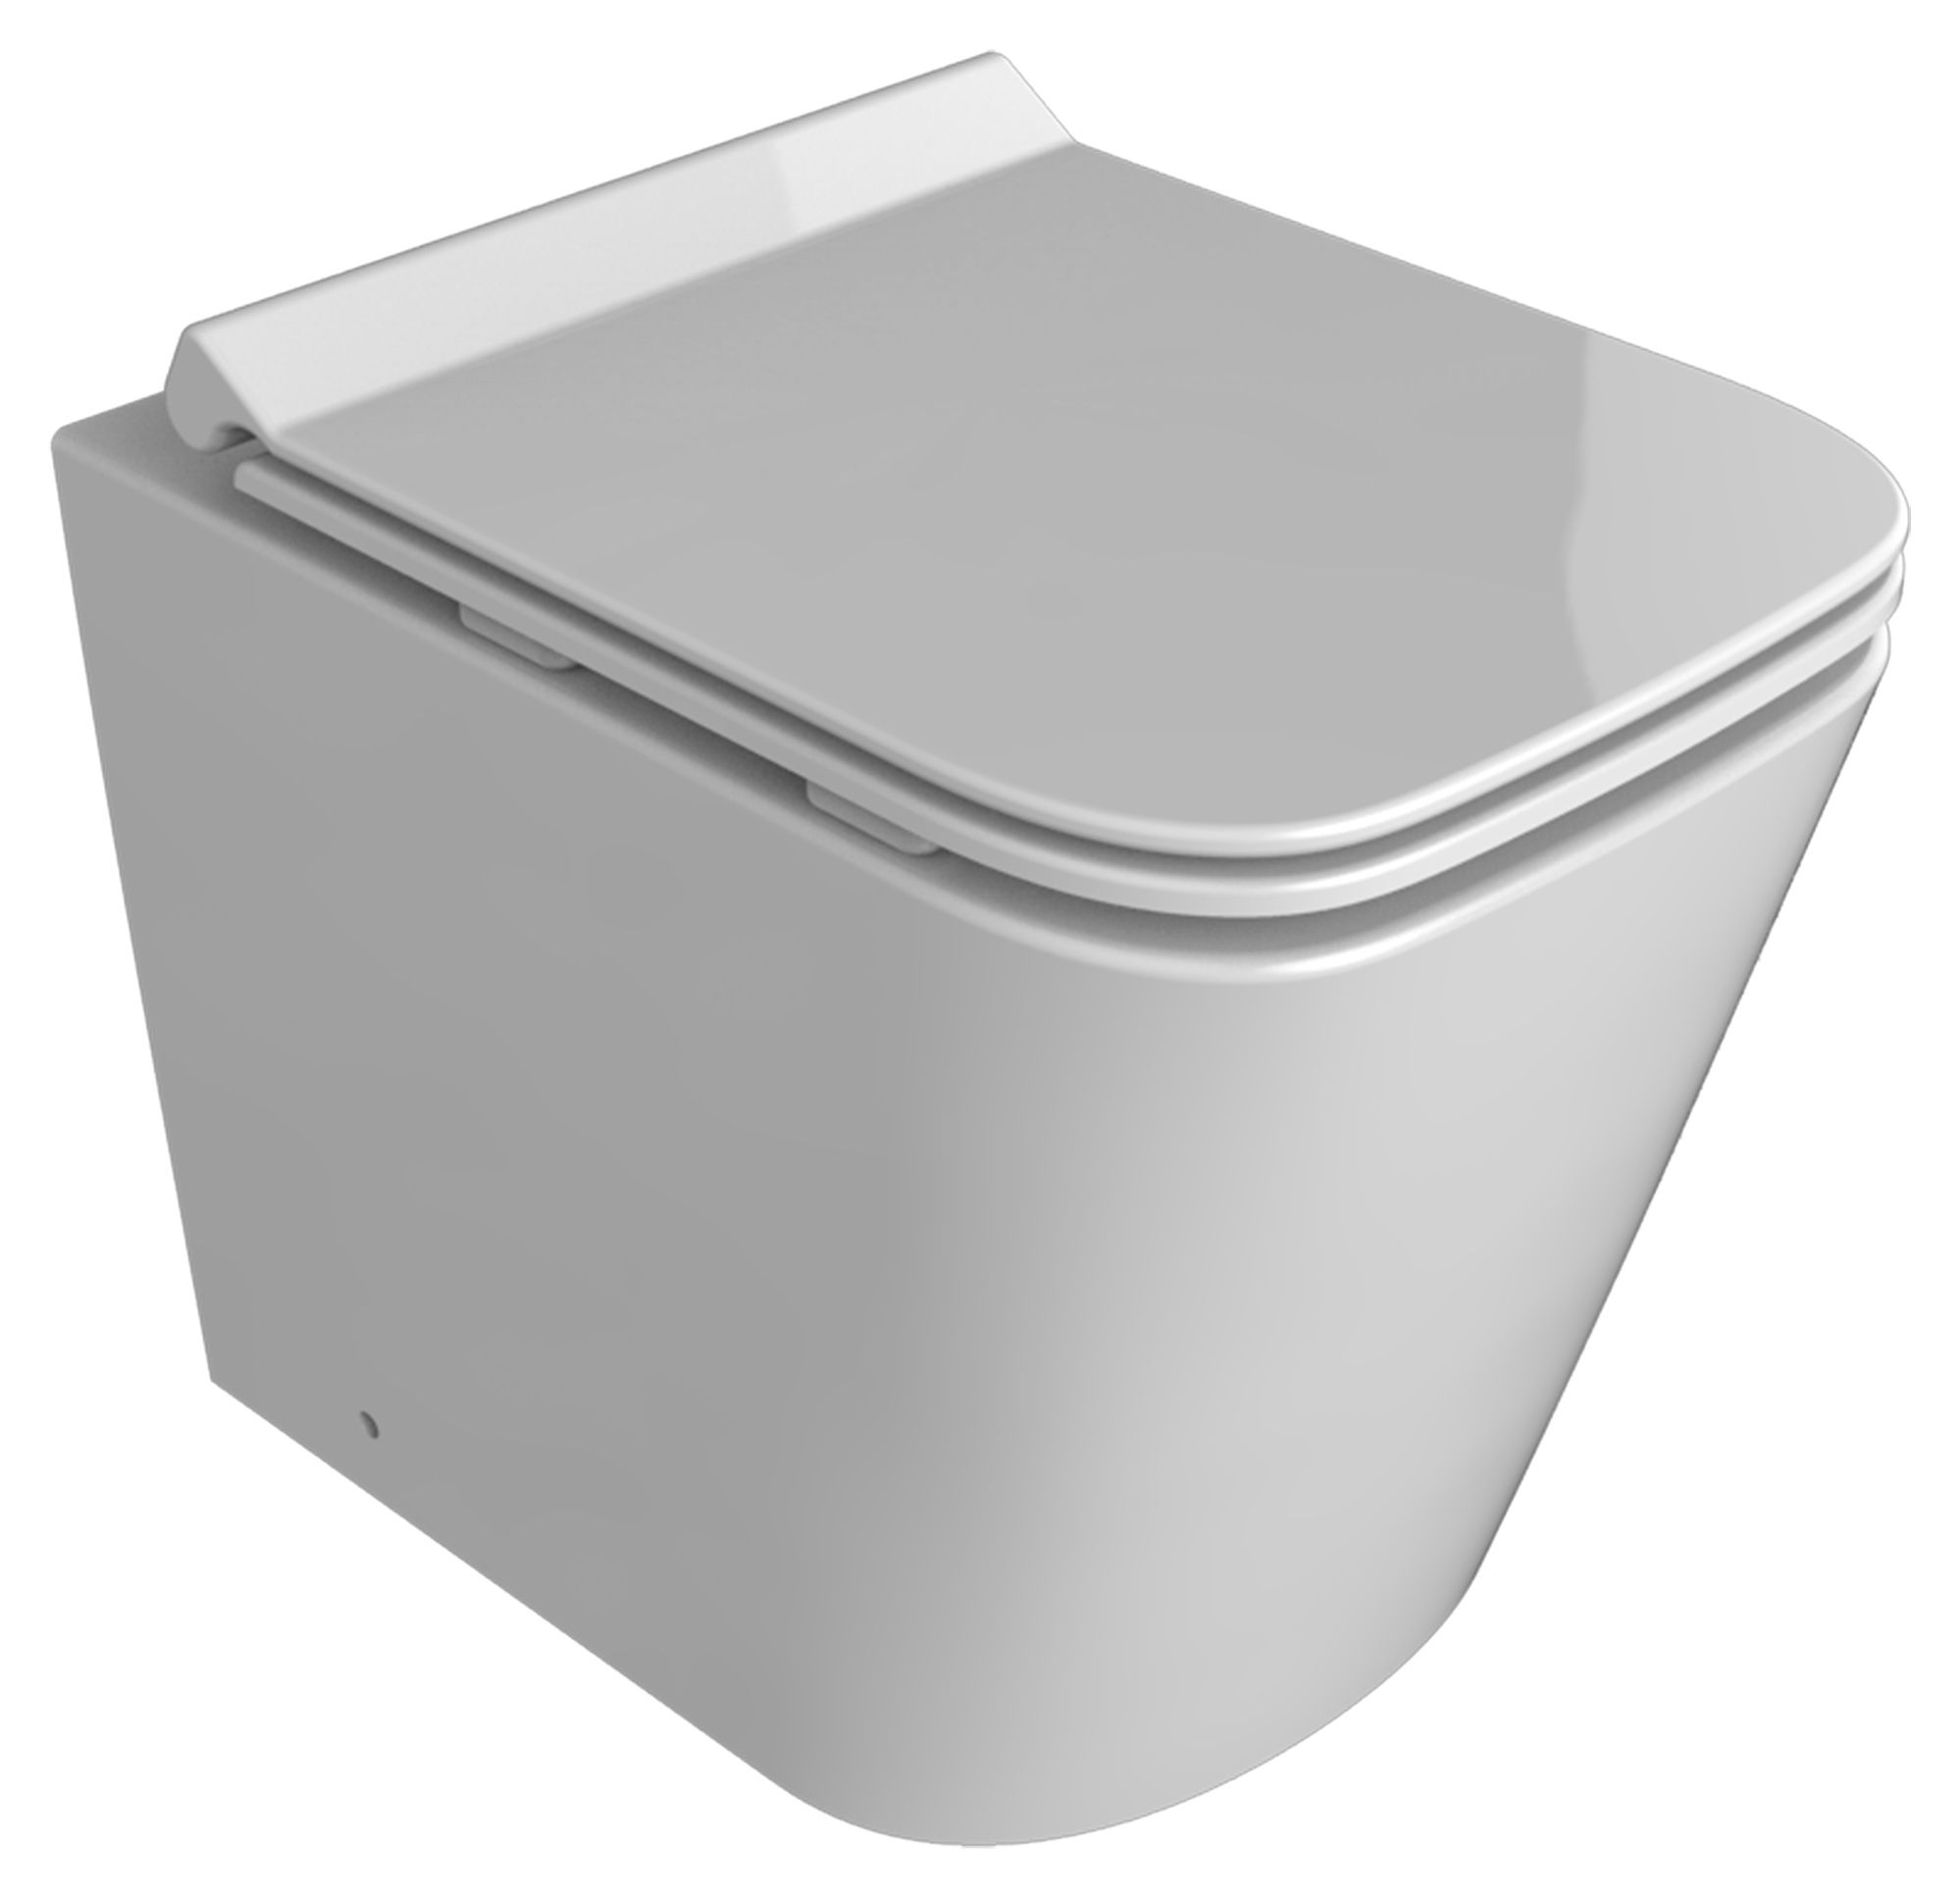 Image of Wickes Meleti Easy Clean Back To Wall Toilet Pan & Soft Close Slim Seat - 400 x 350mm